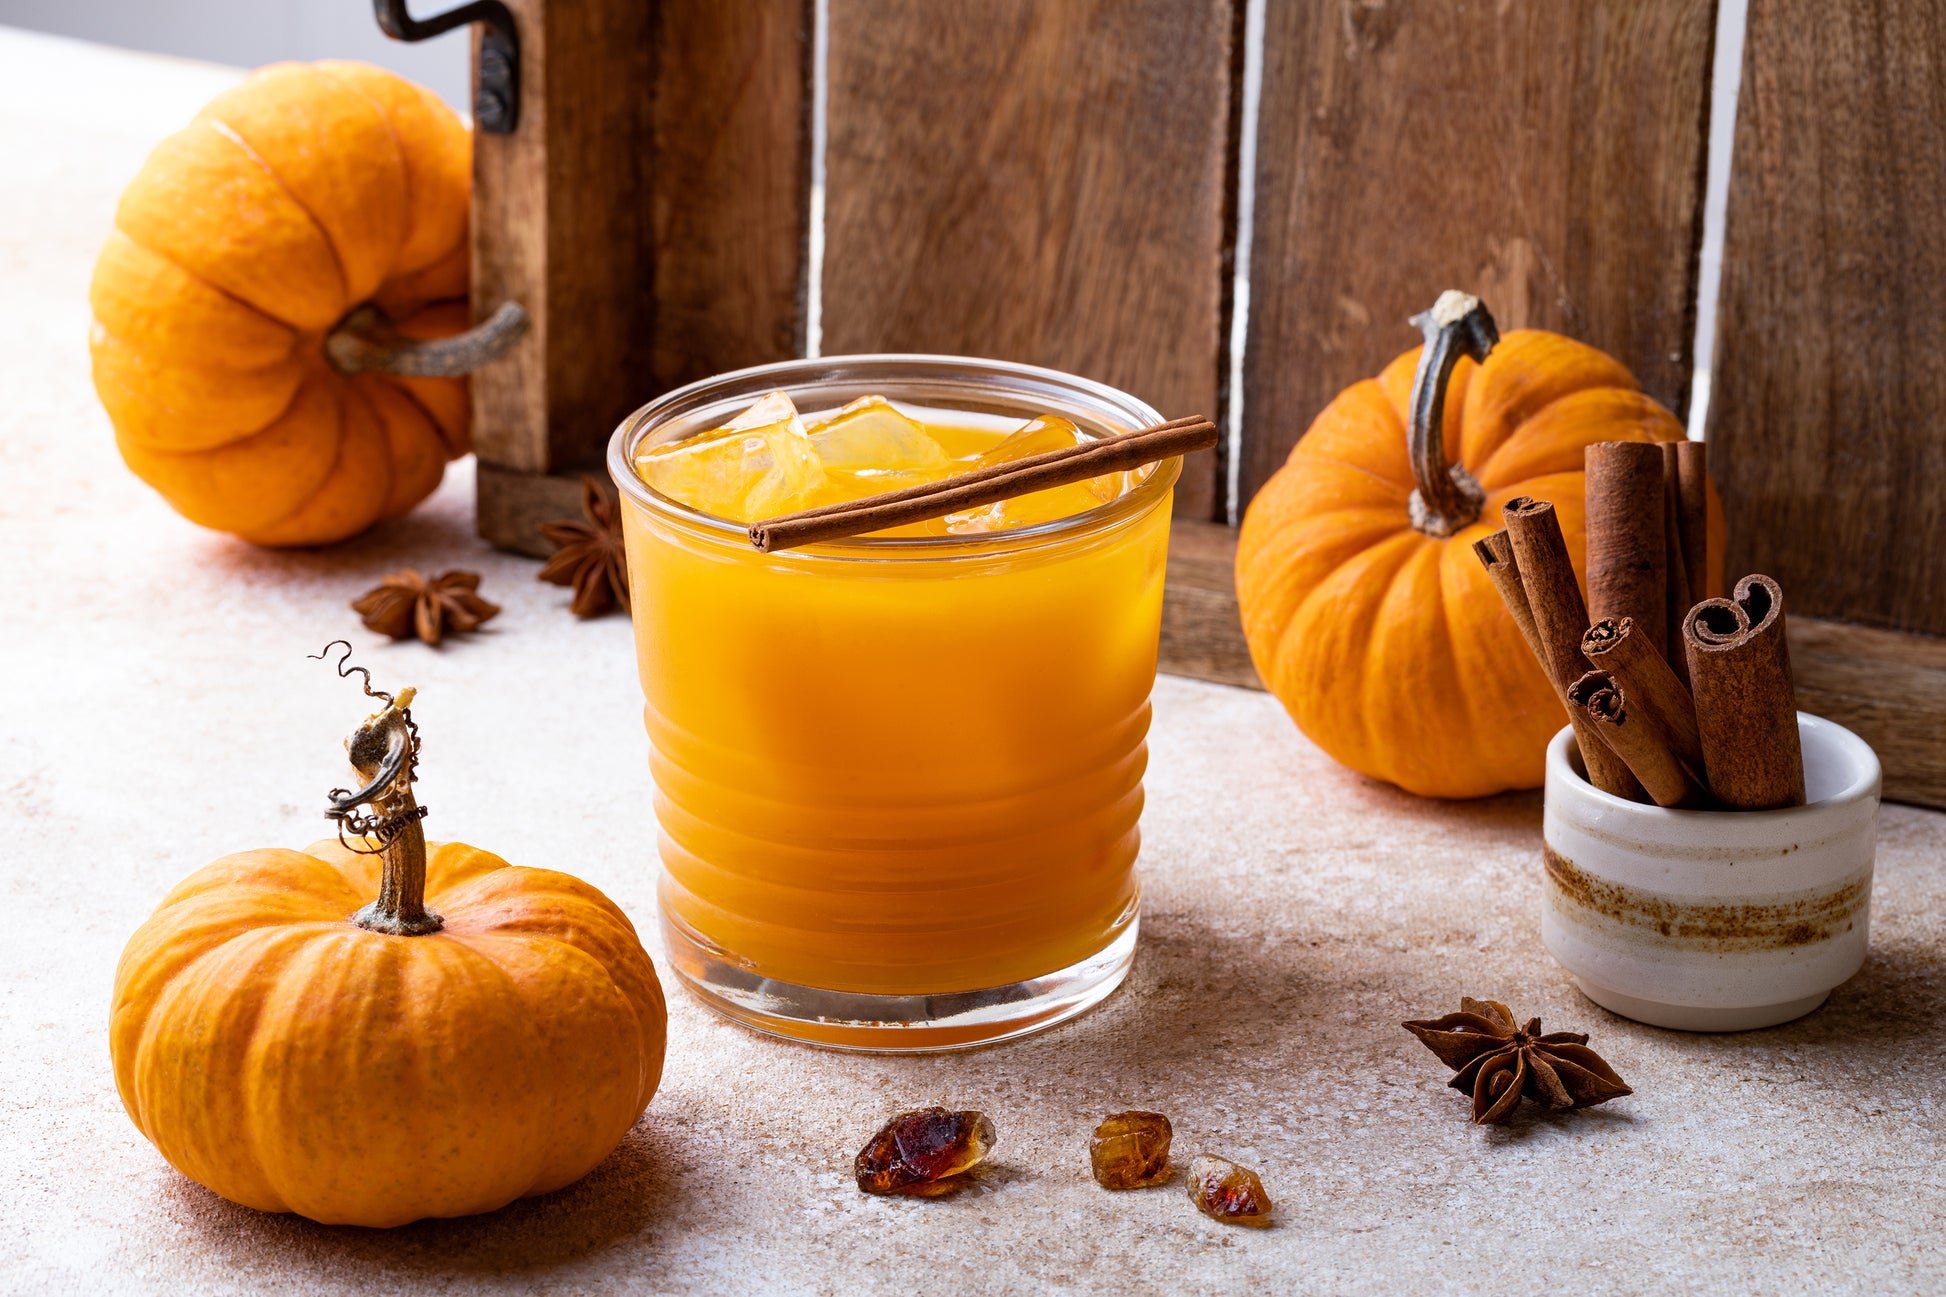 A glass of burbon with small pumkins around and a glass of cinnamon sticks